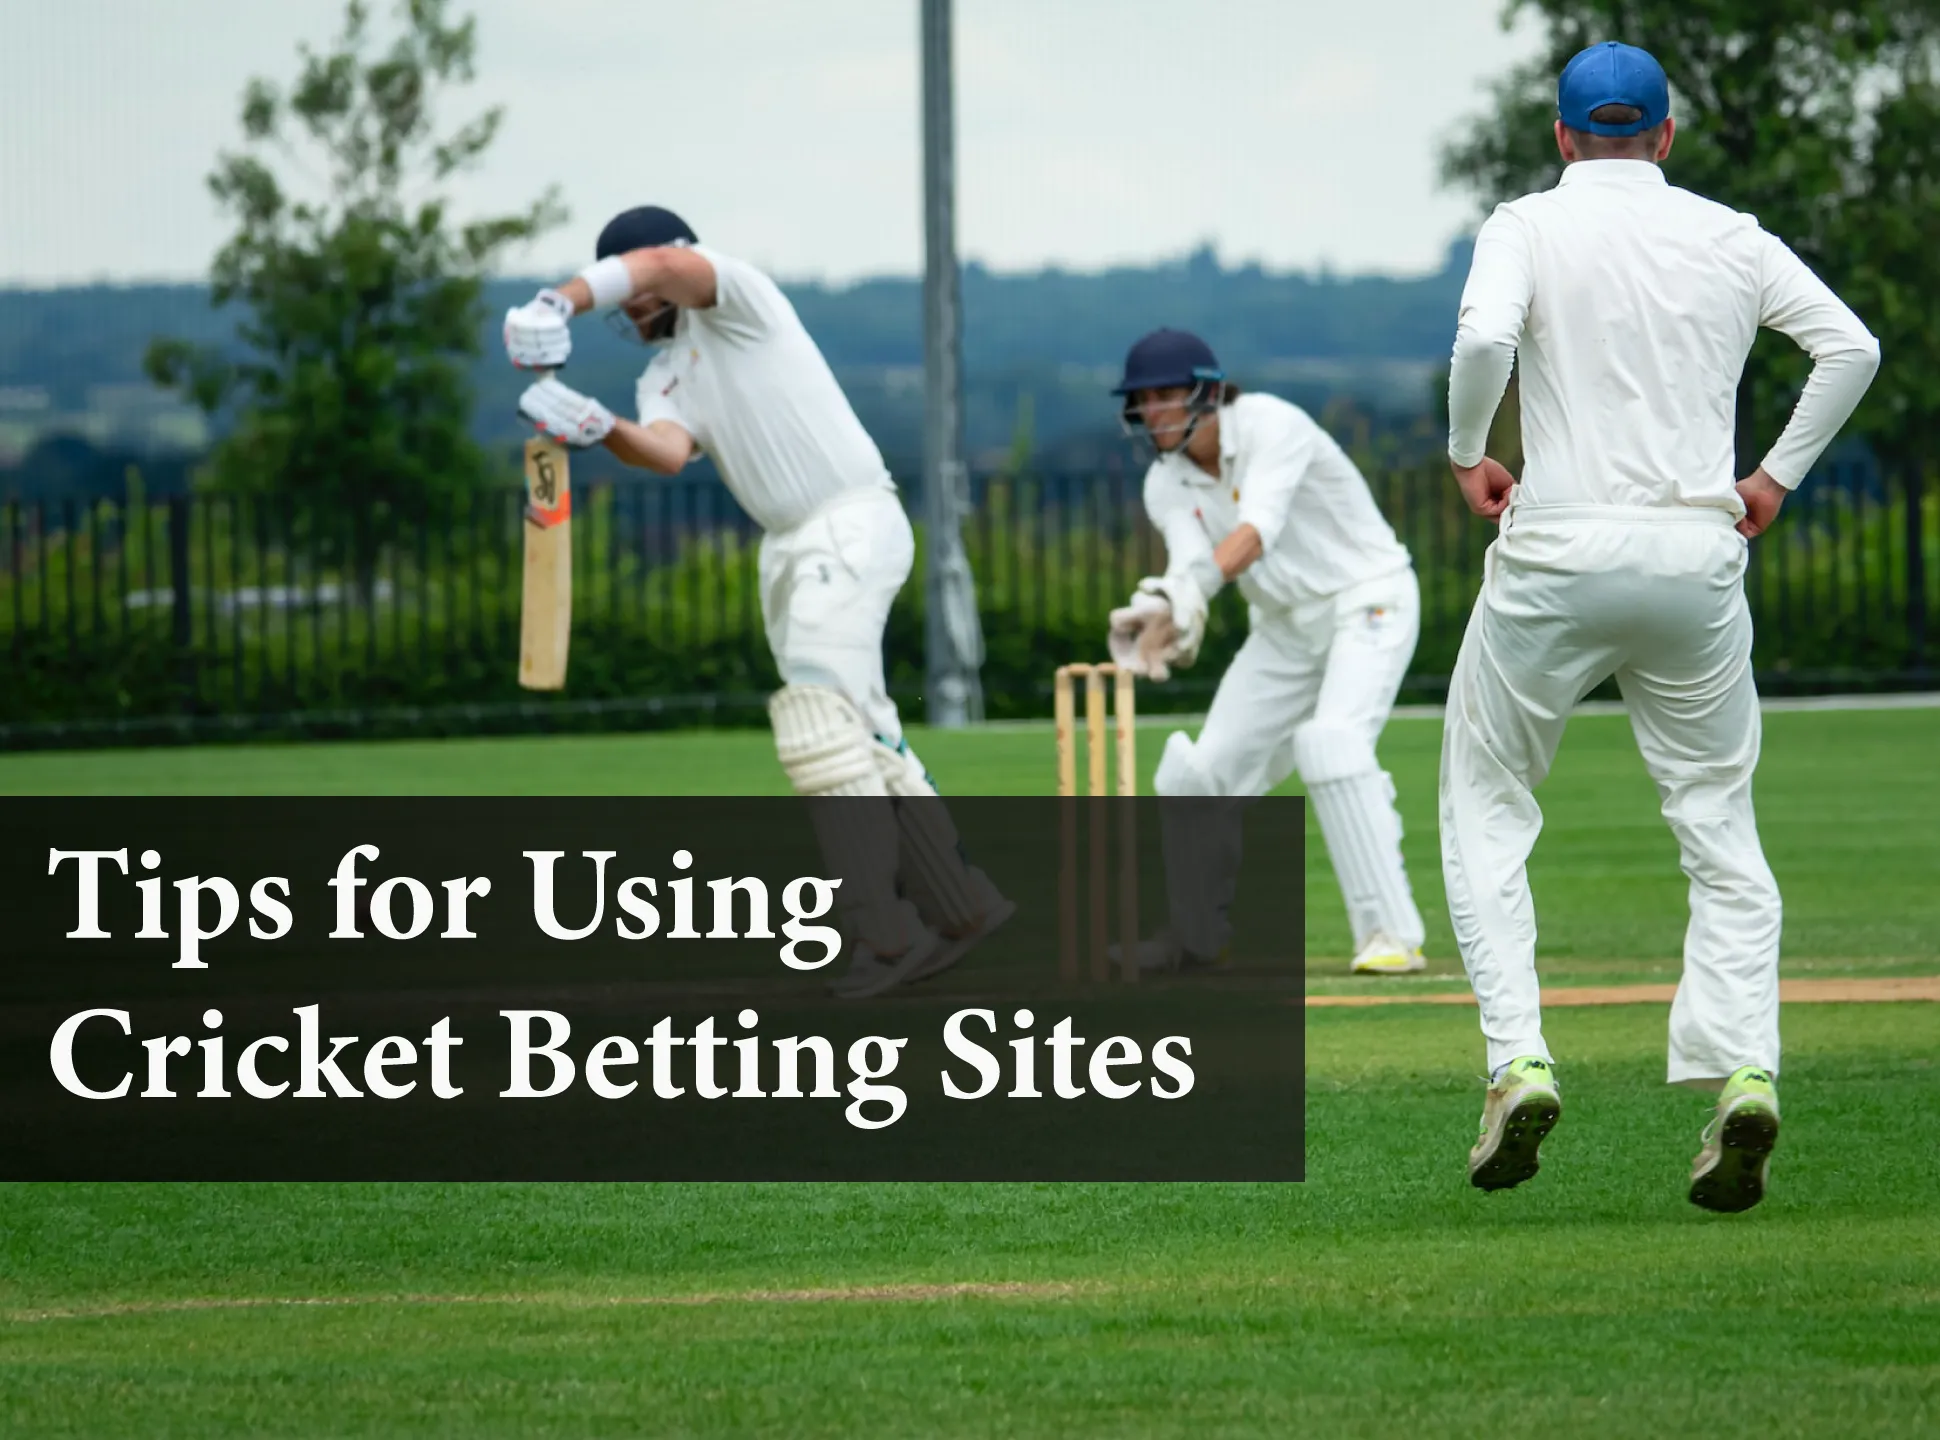 Read these tips to increase your chances of winning in cricket betting.